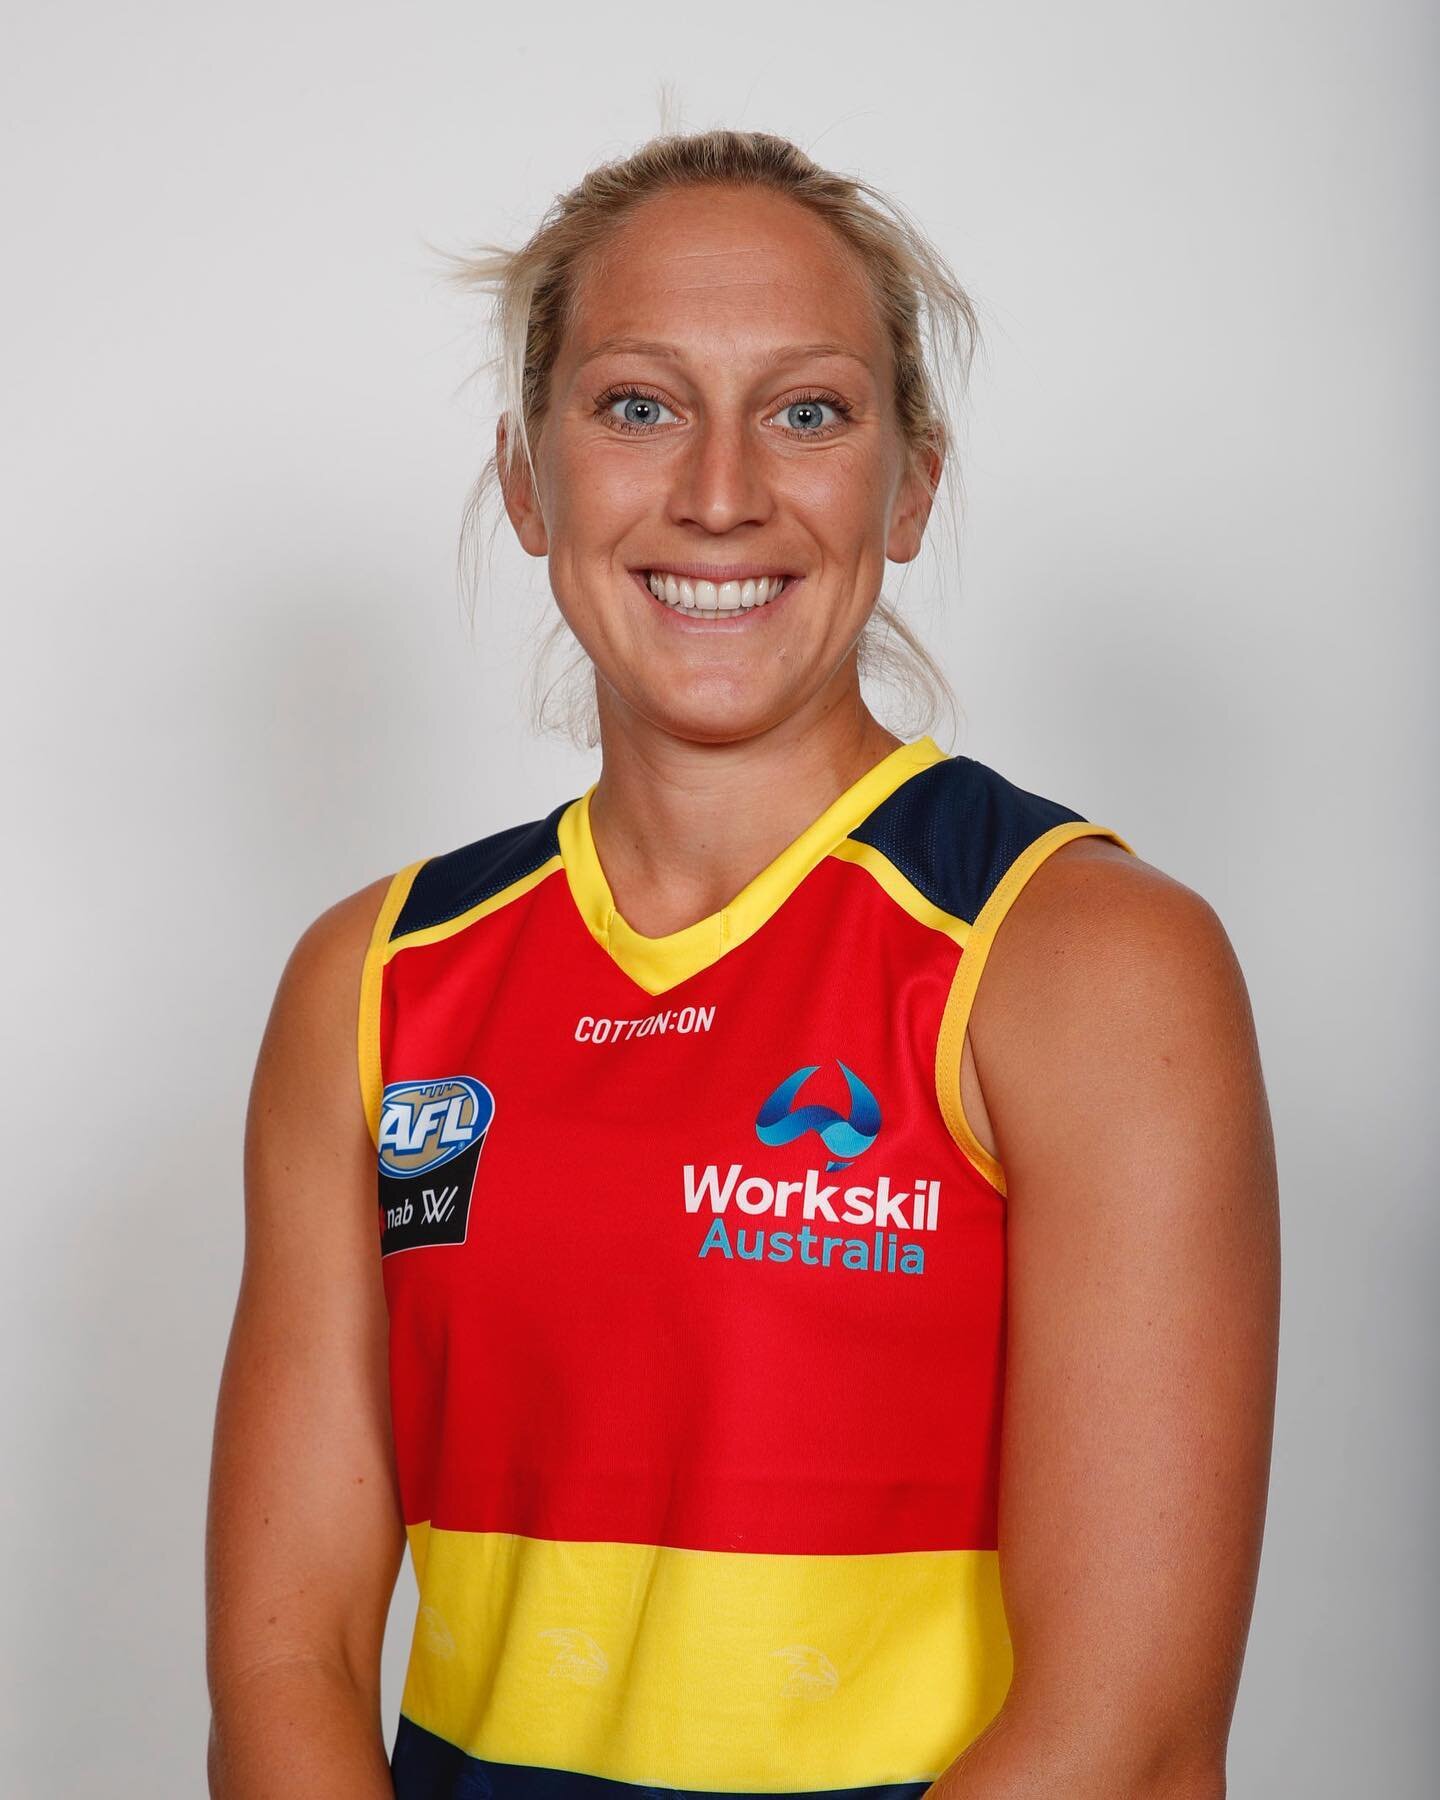 OLD SCHOLAR&rsquo;S STORY: @rajcic32 
For the month of August, LOSA would like to recognise Marijana Rajcic (&rsquo;06). MJ is an AFLW player for the Adelaide Crows and was a contestant on The Amazing Race Australia. MJ explains to us her personal an